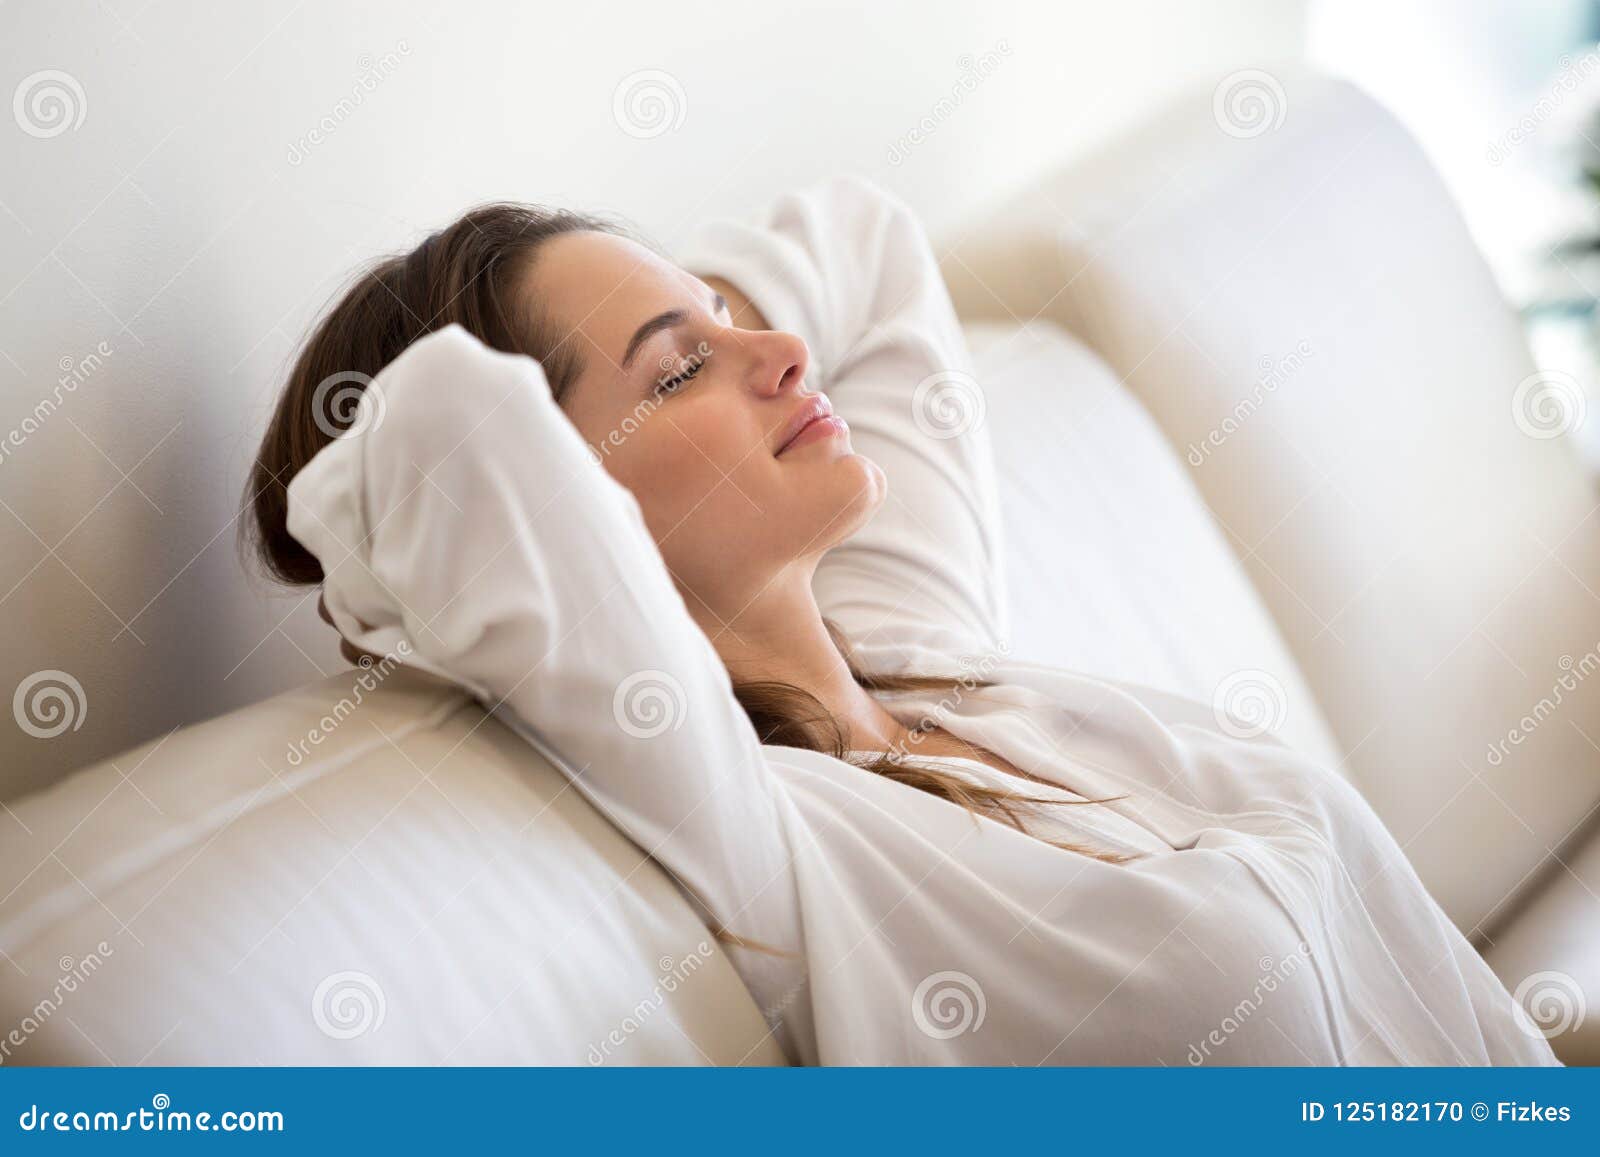 calm millennial woman relaxing on comfortable sofa breathing fre